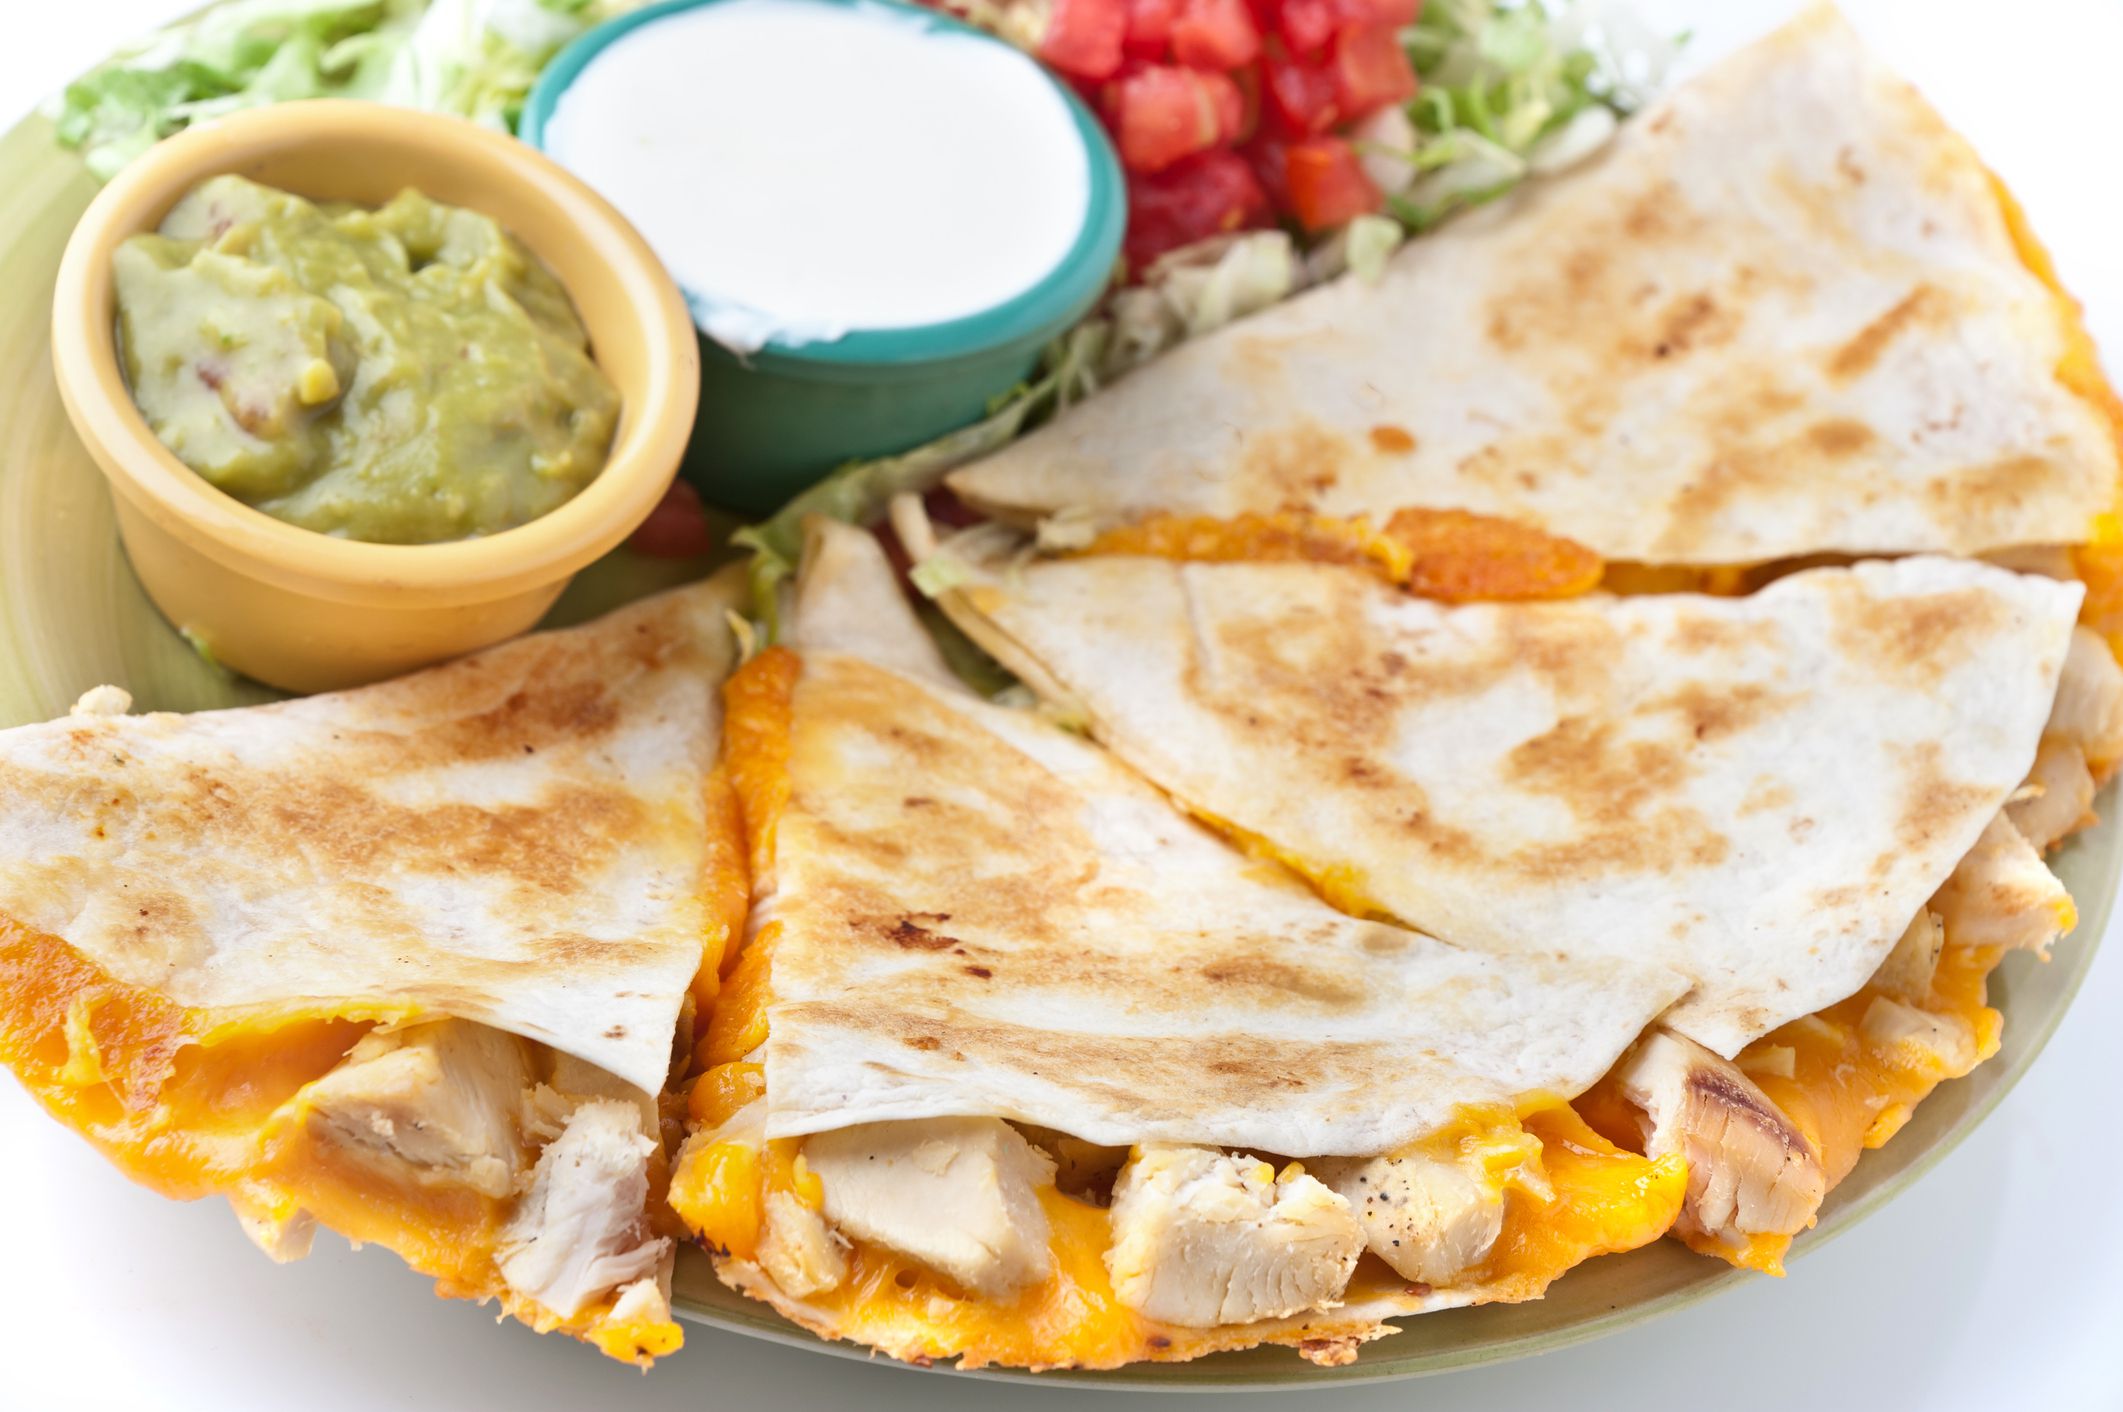 Chicken Quesadillas Recipe - How to Use Your Leftovers